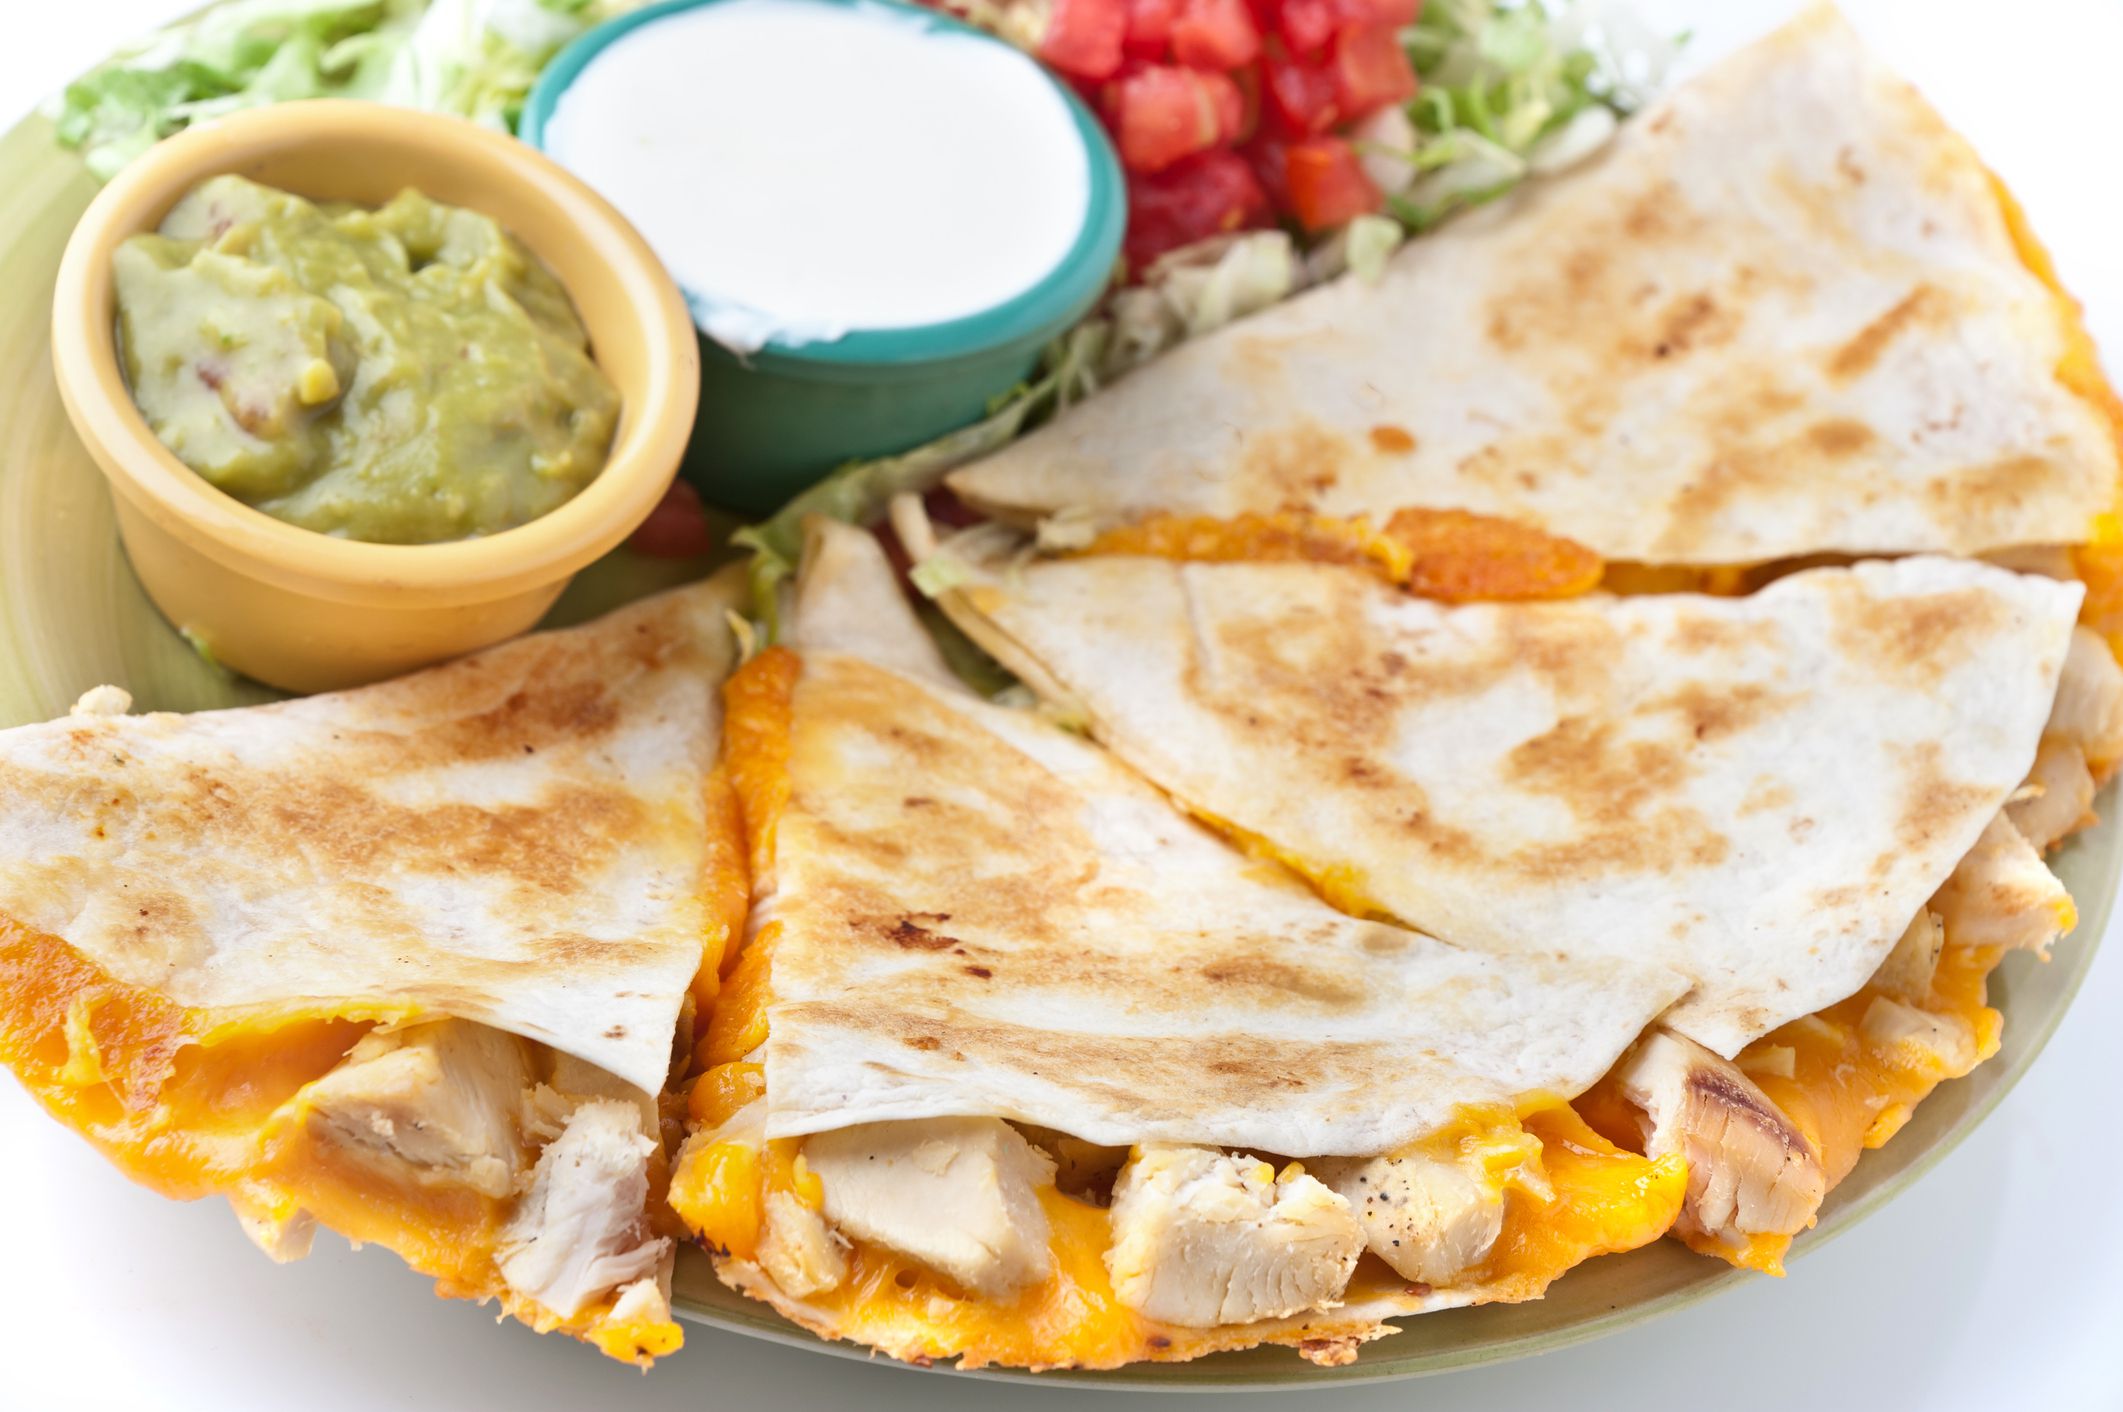 Chicken Quesadillas Recipe - How to Use Your Leftovers